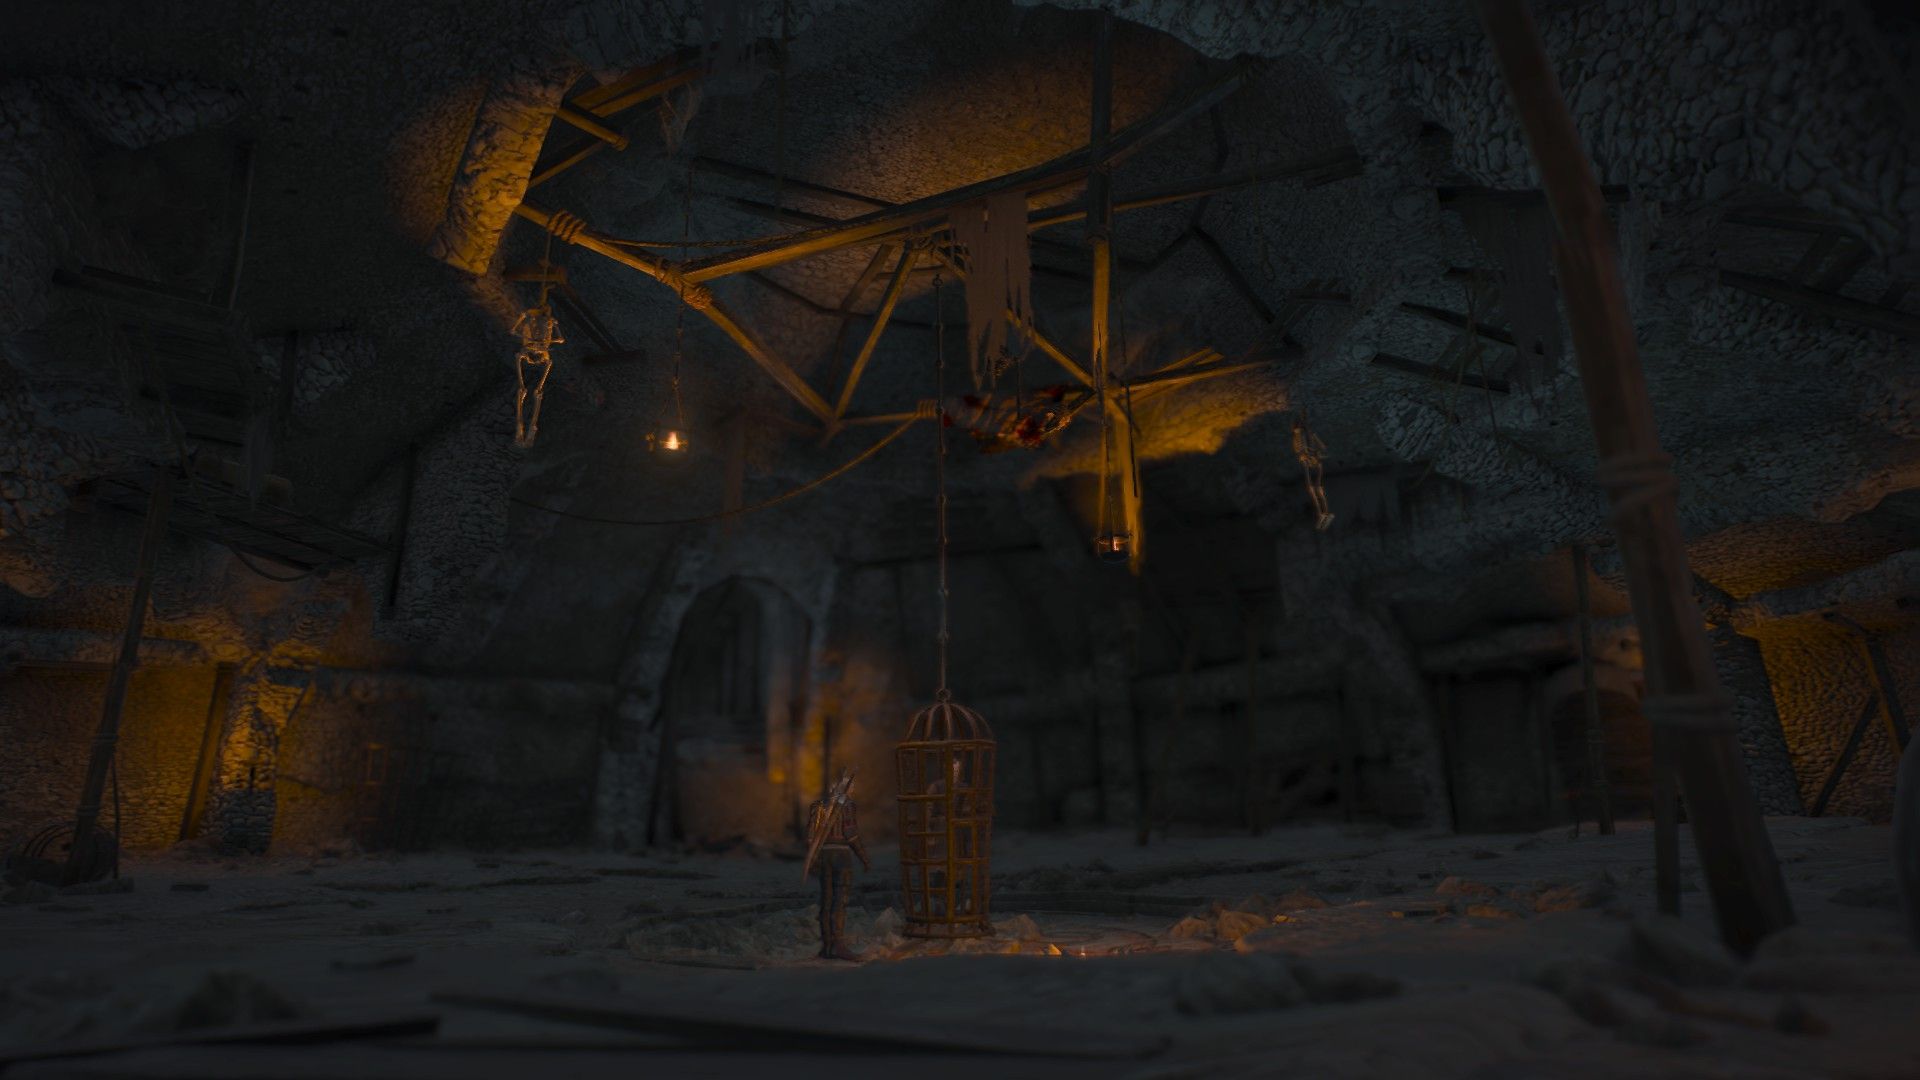 Geralt locks his friend in a cage inside a cave chamber under the castle.